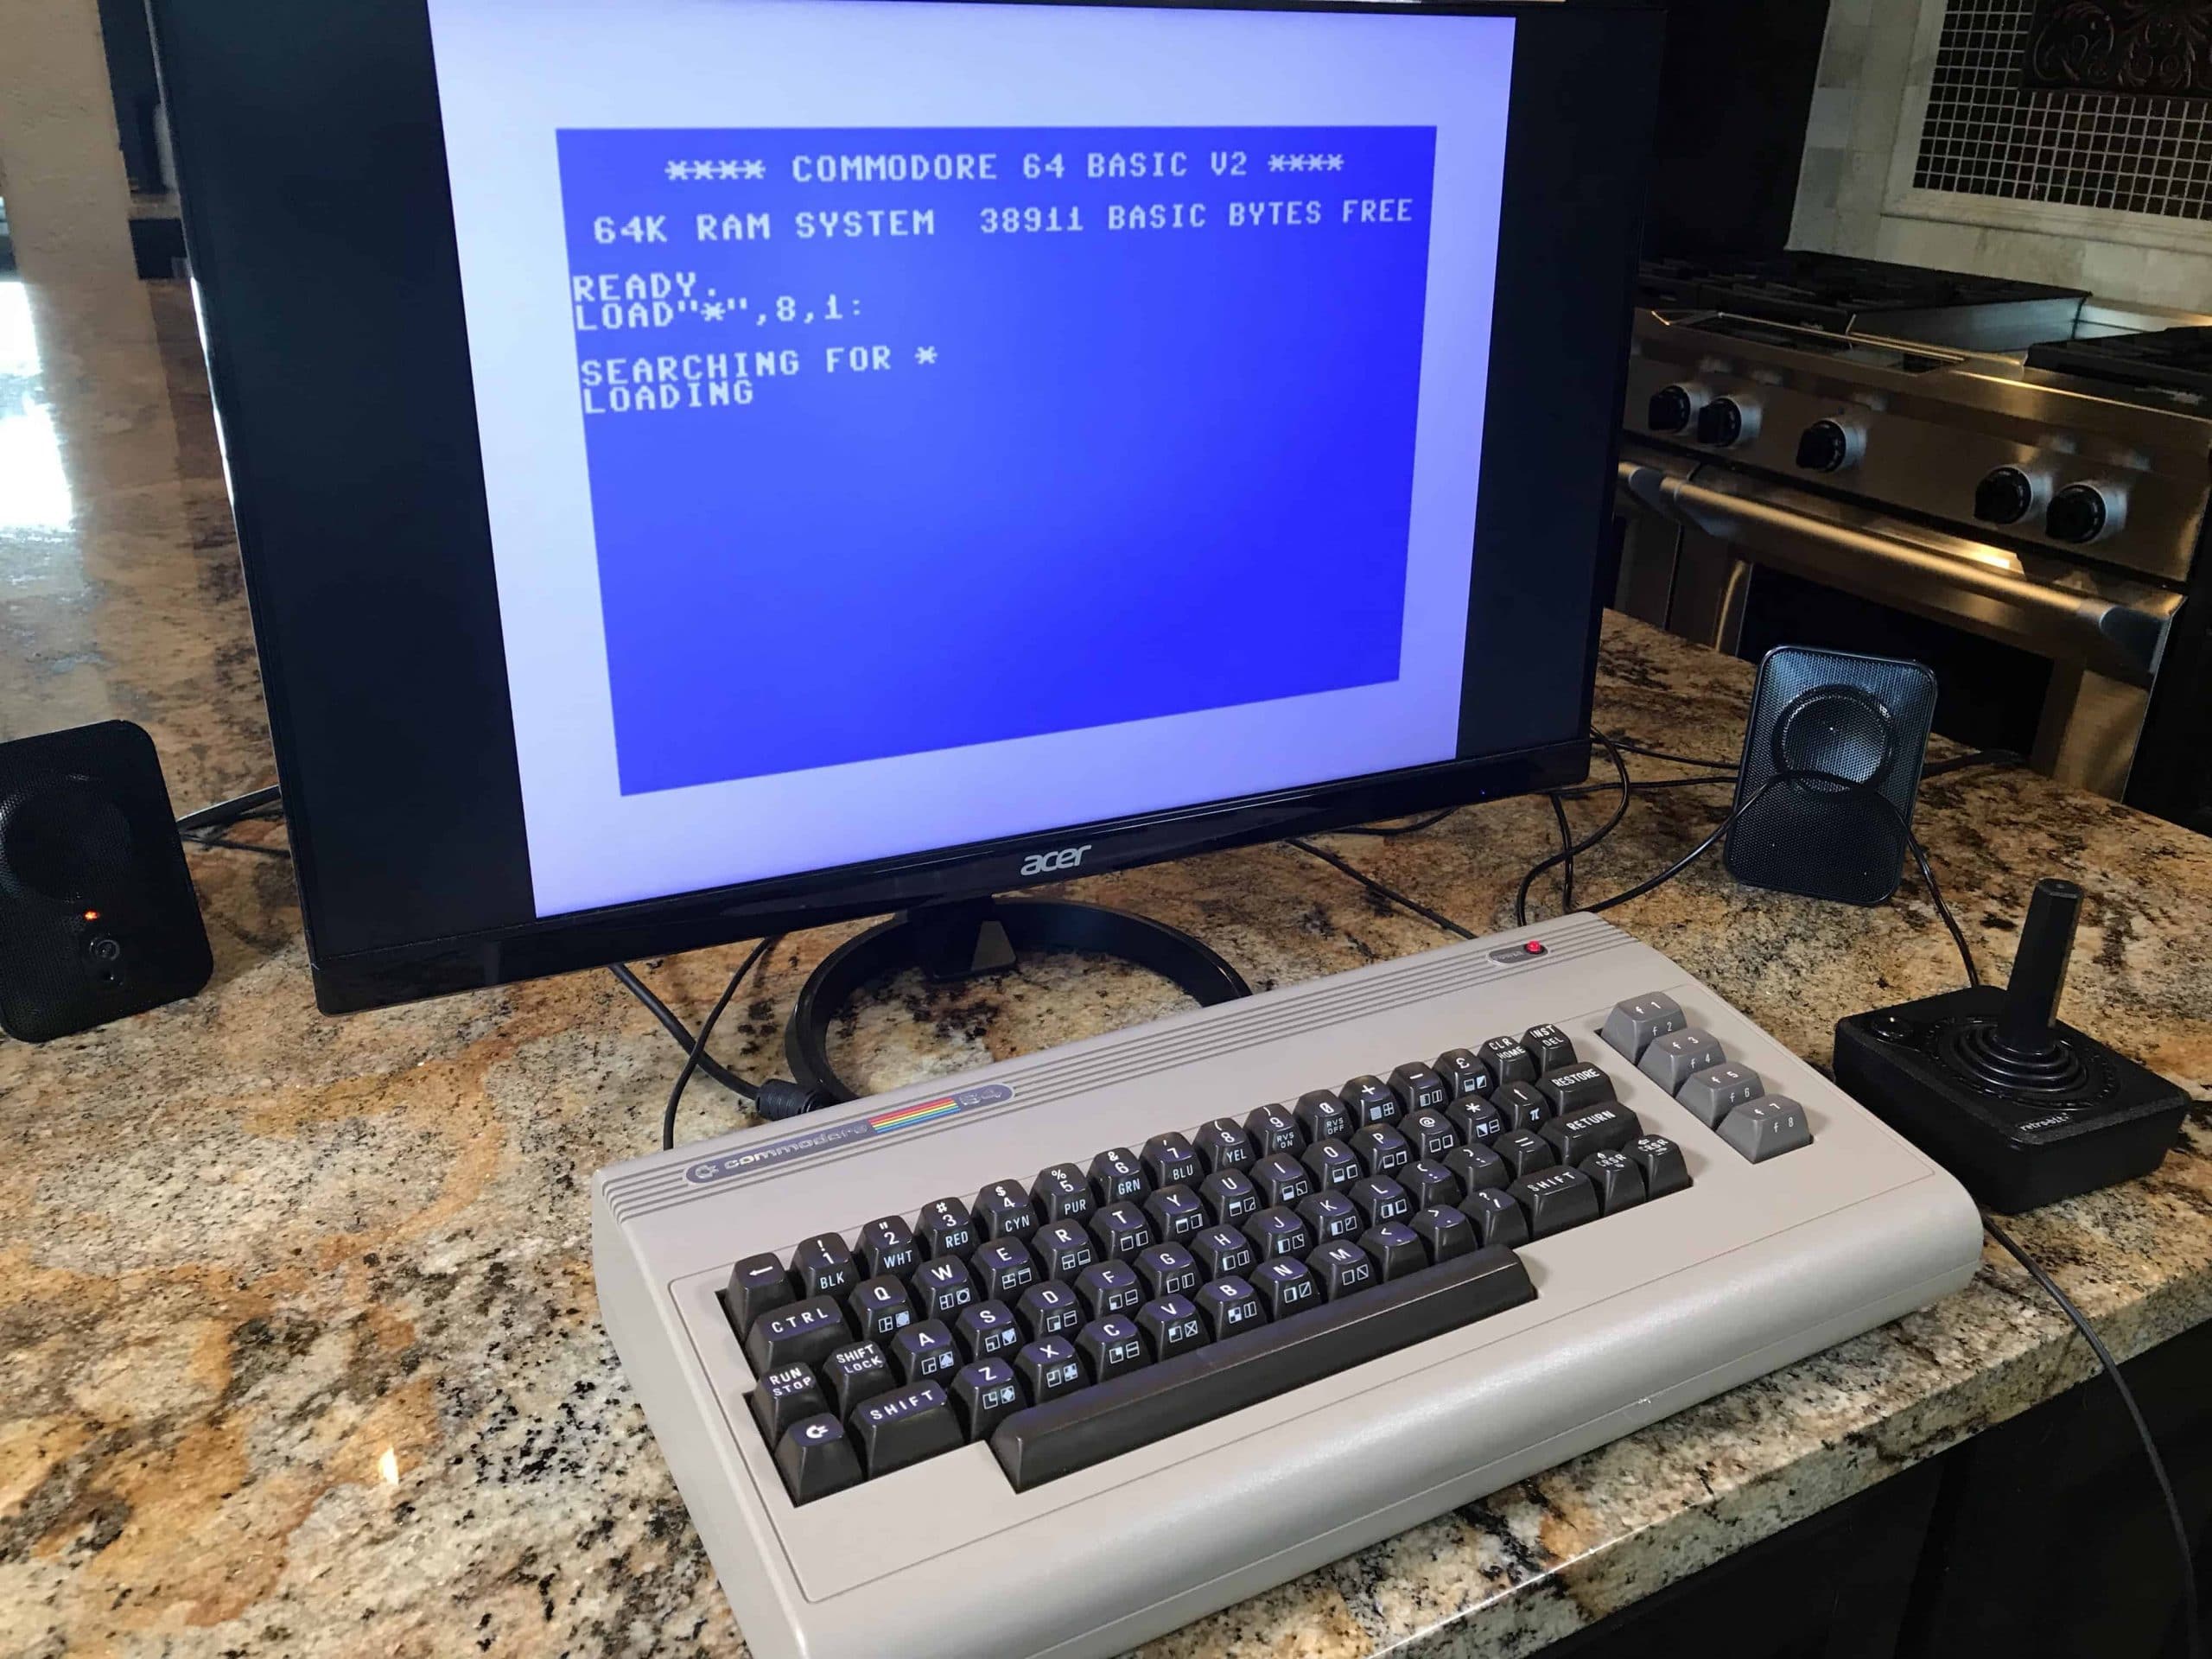 Building A Commodore 64 That Can Play Modern Games! 